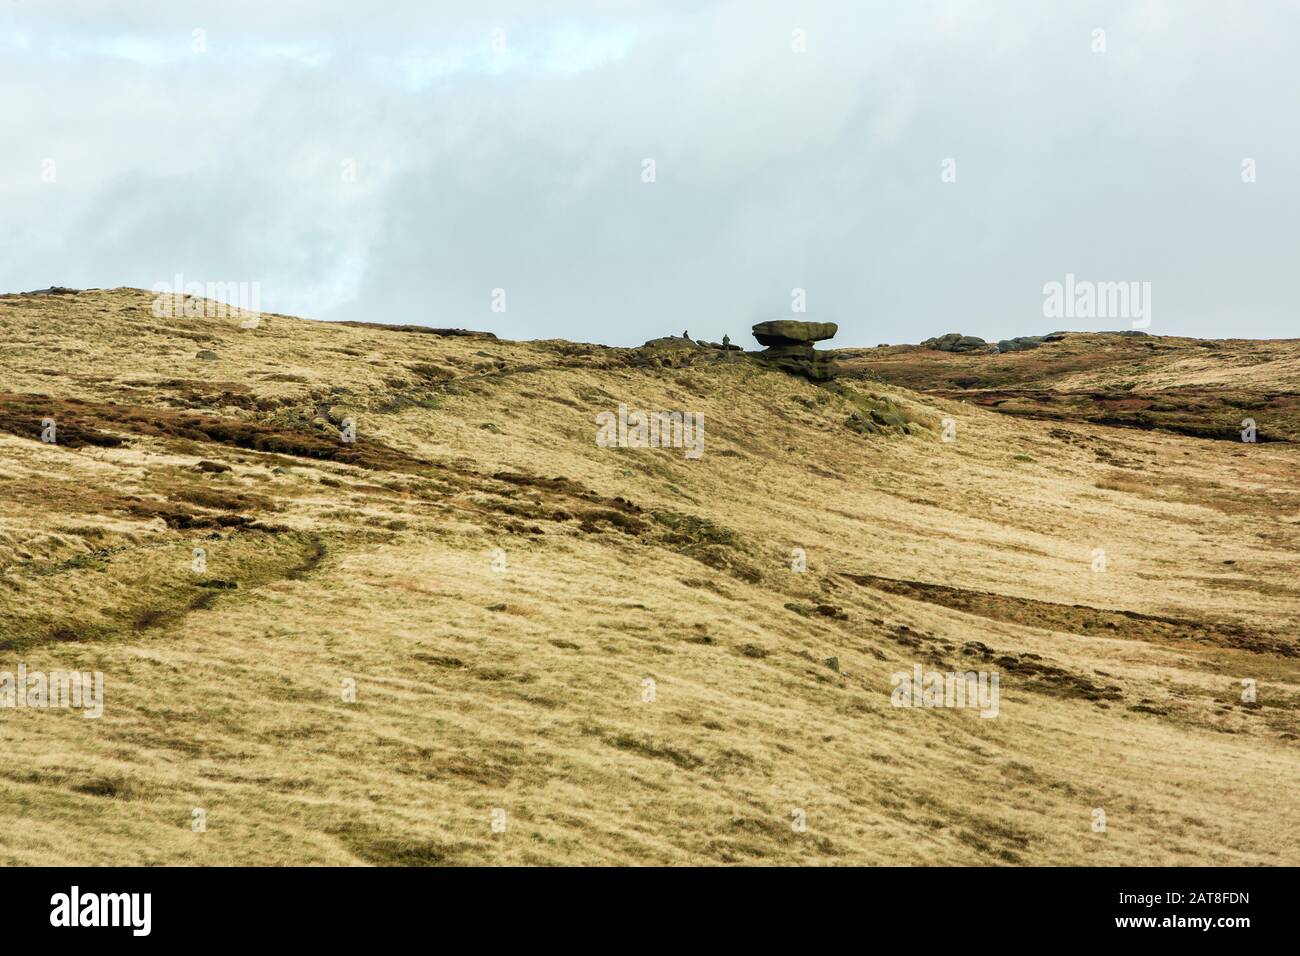 The Noe Stool on Kinder Scout, Peak District National Park, Derbyshire, England Stock Photo